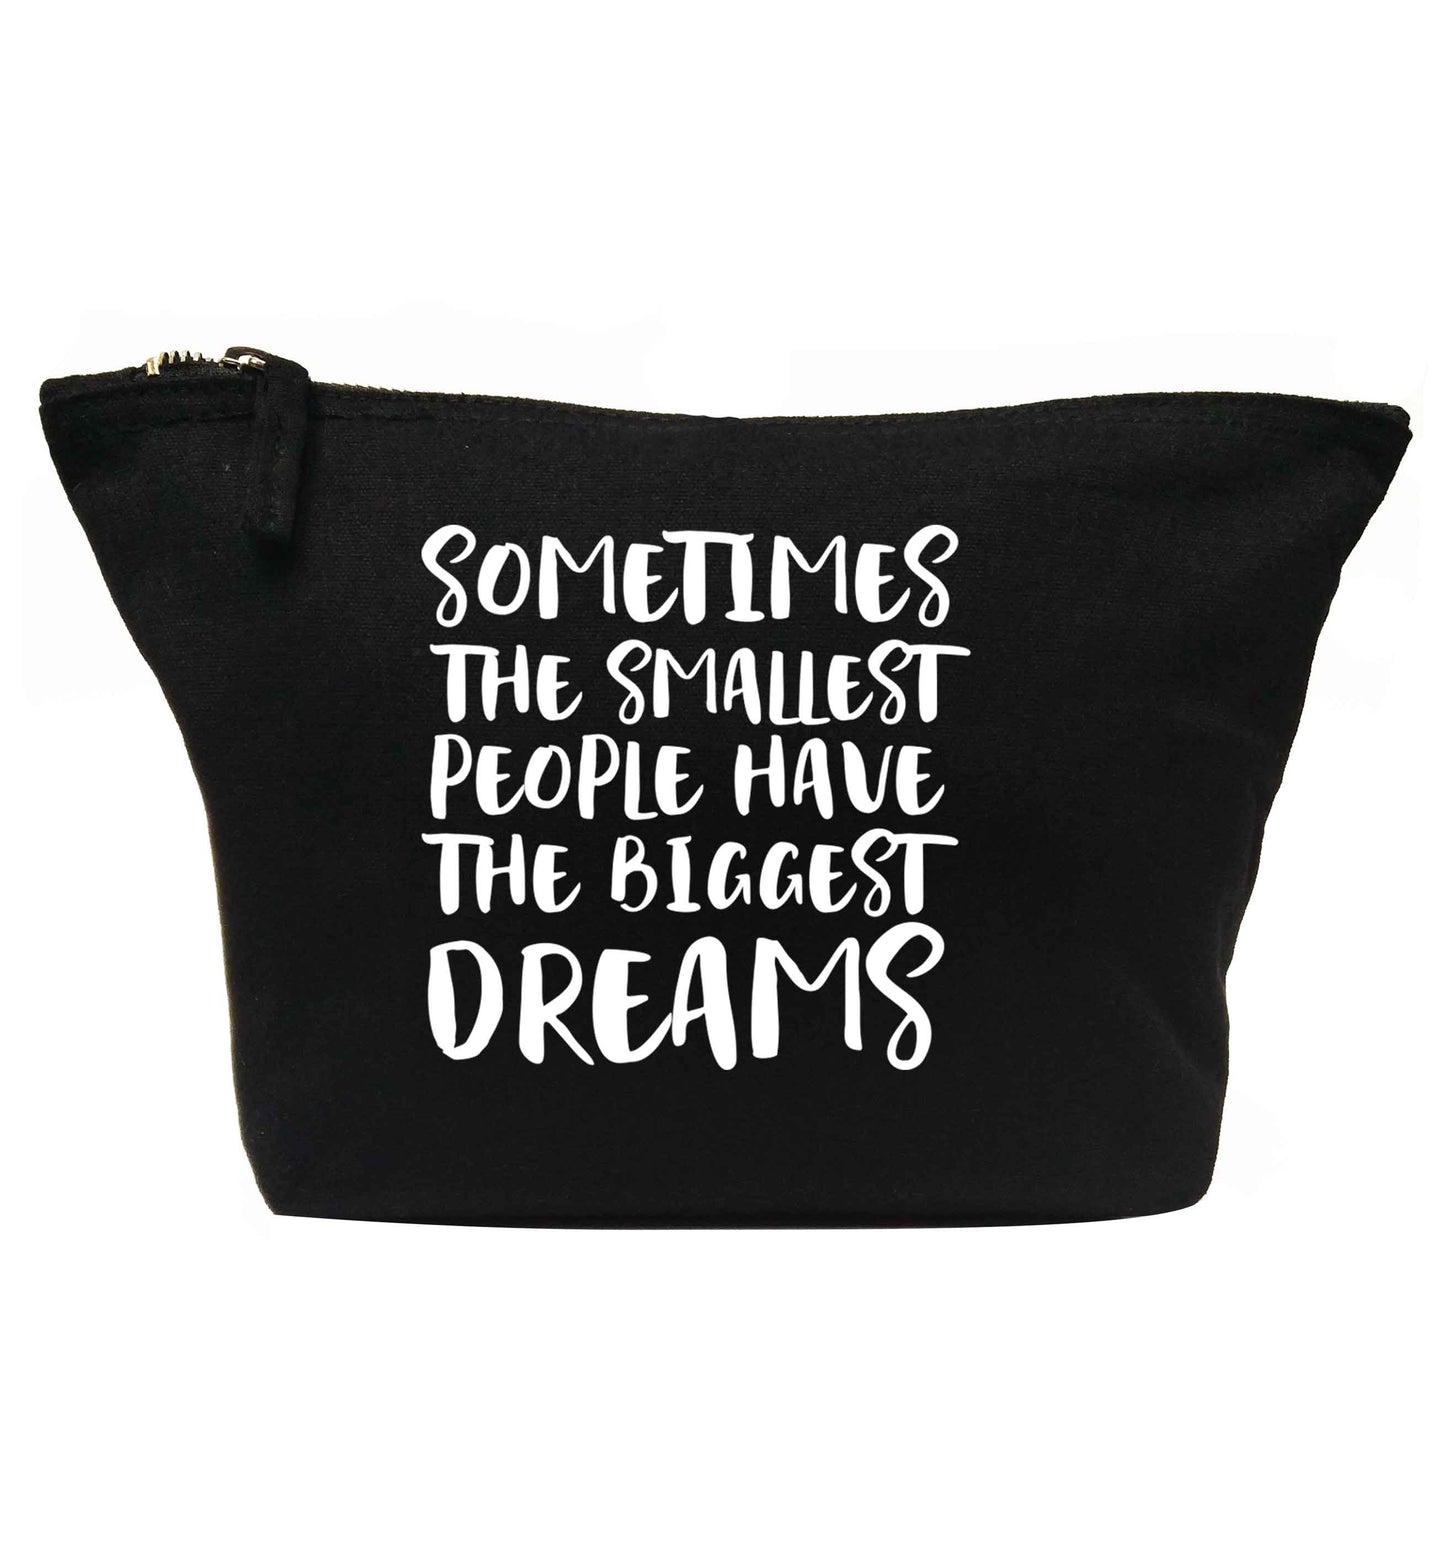 Sometimes the smallest people have the biggest dreams | makeup / wash bag